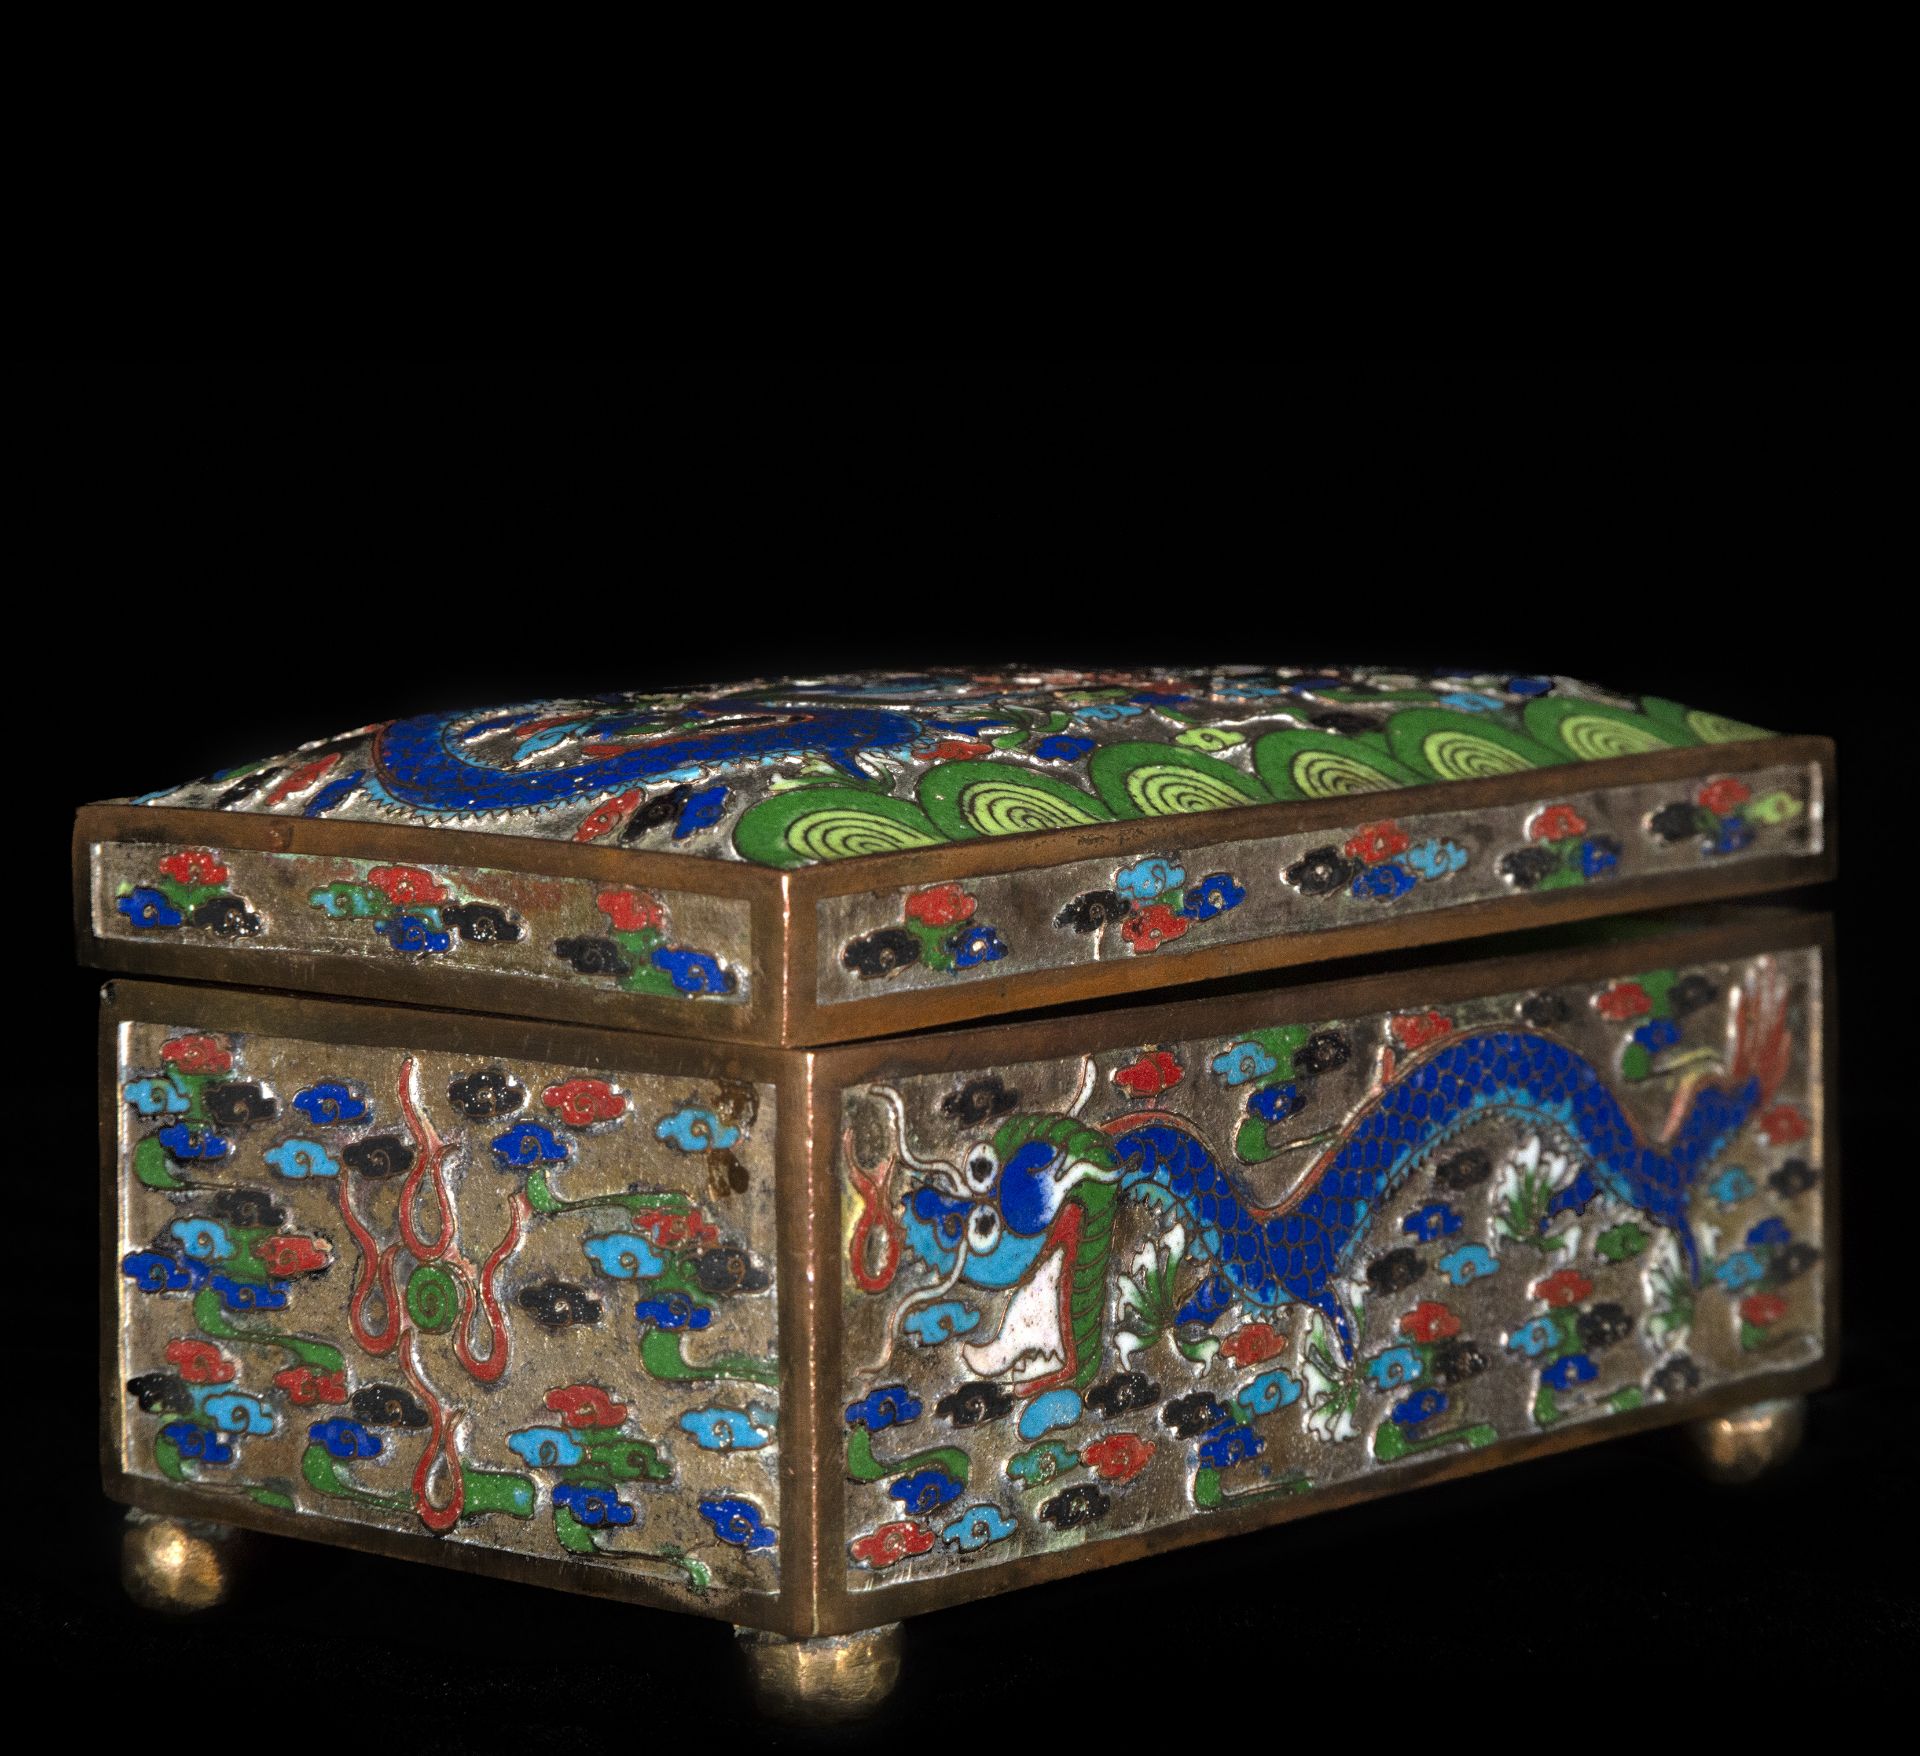 Chinese Cloisonne box from the 19th century - Image 4 of 5